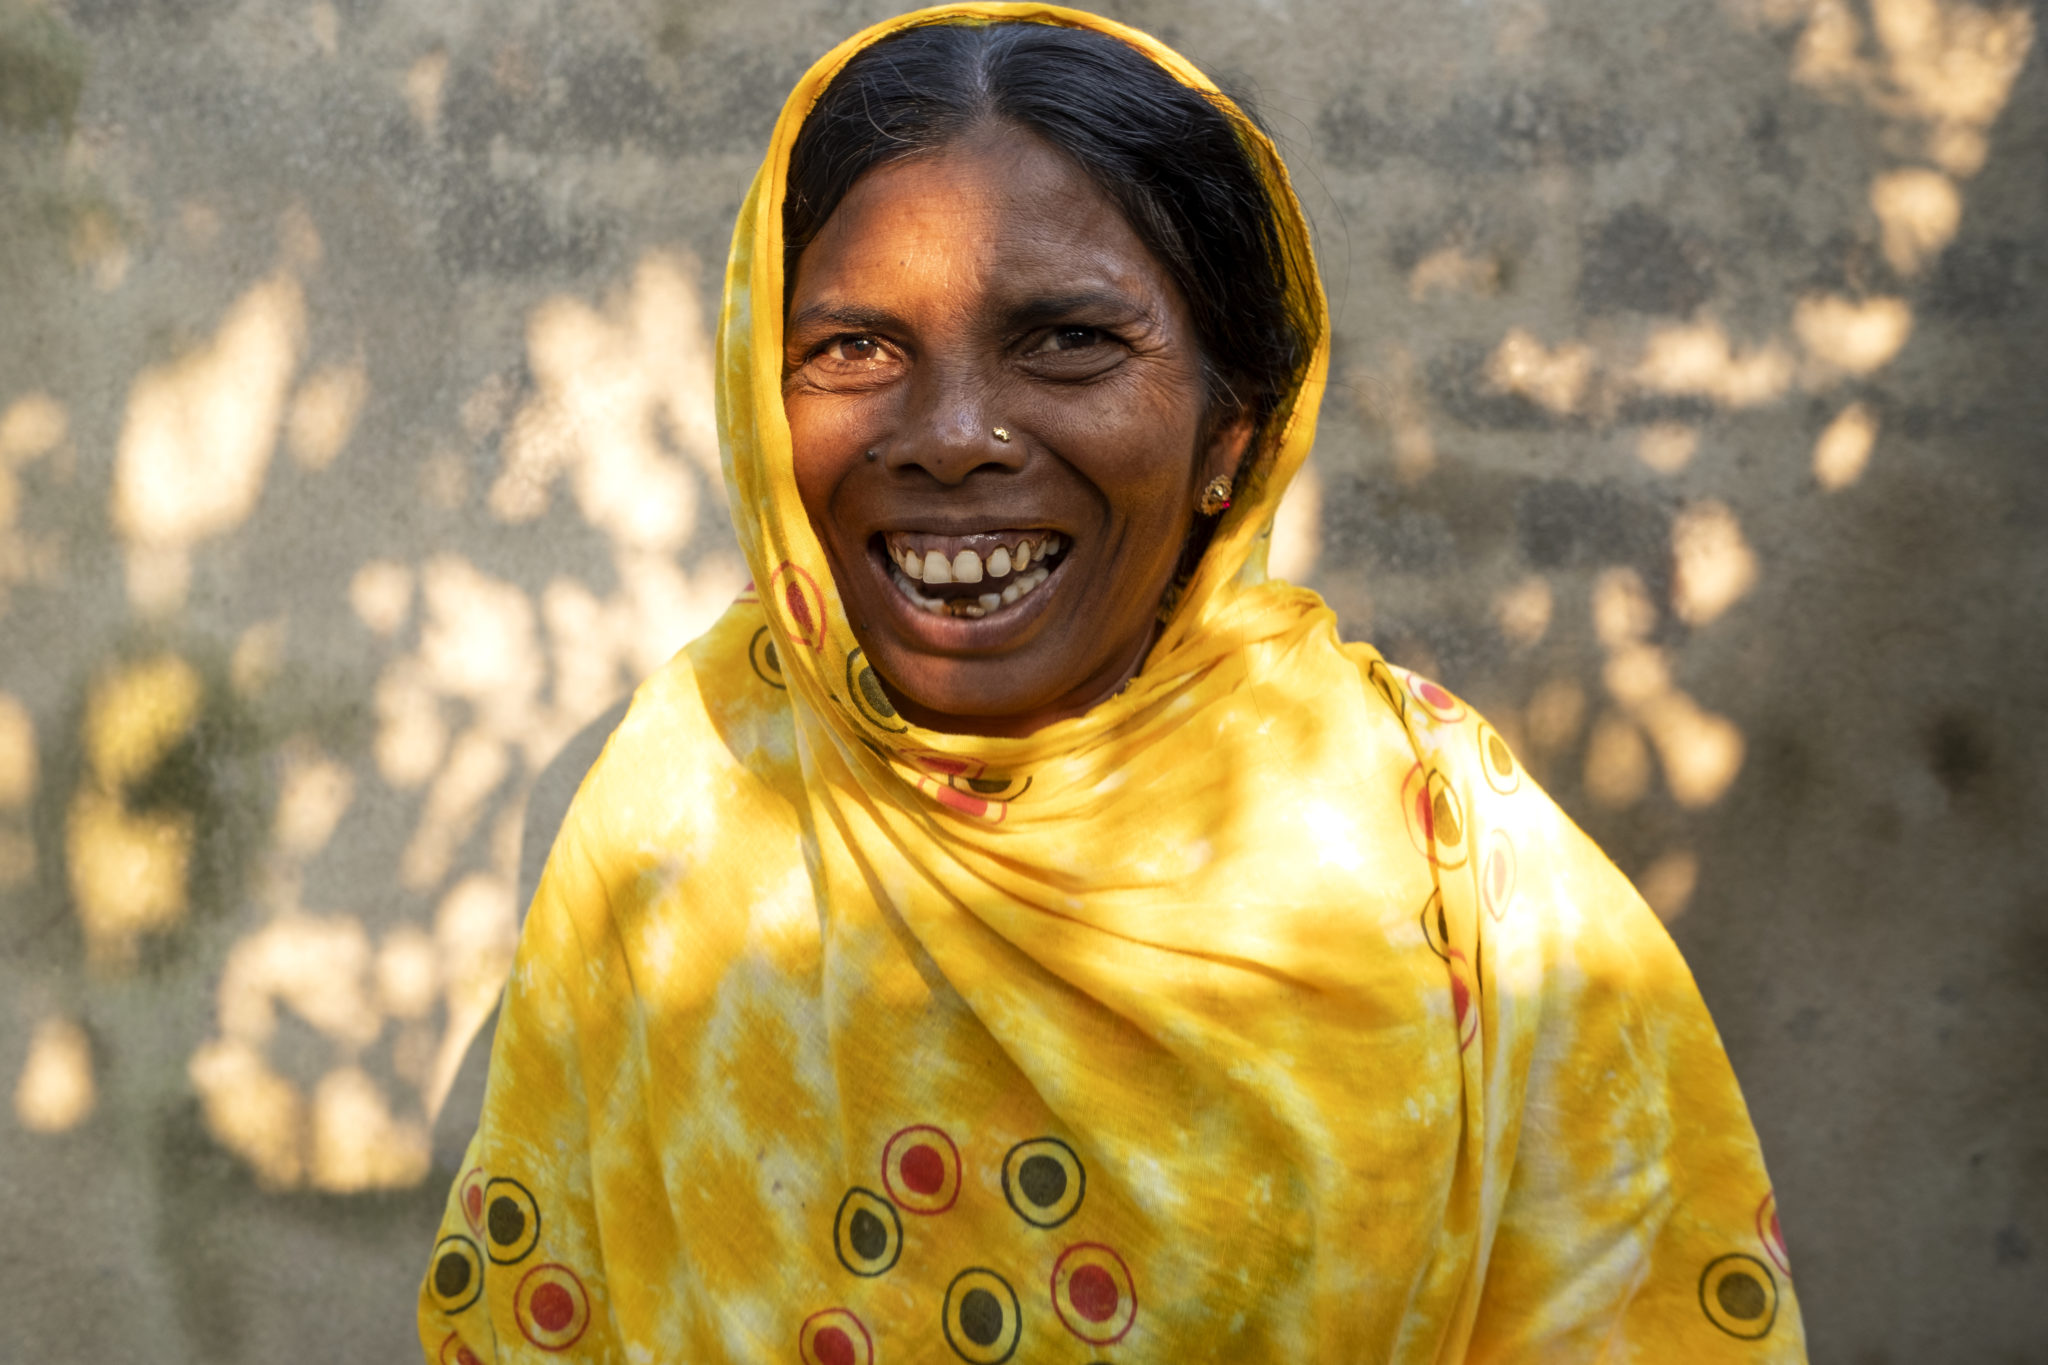 photograph of a woman in a yellow sari smiling